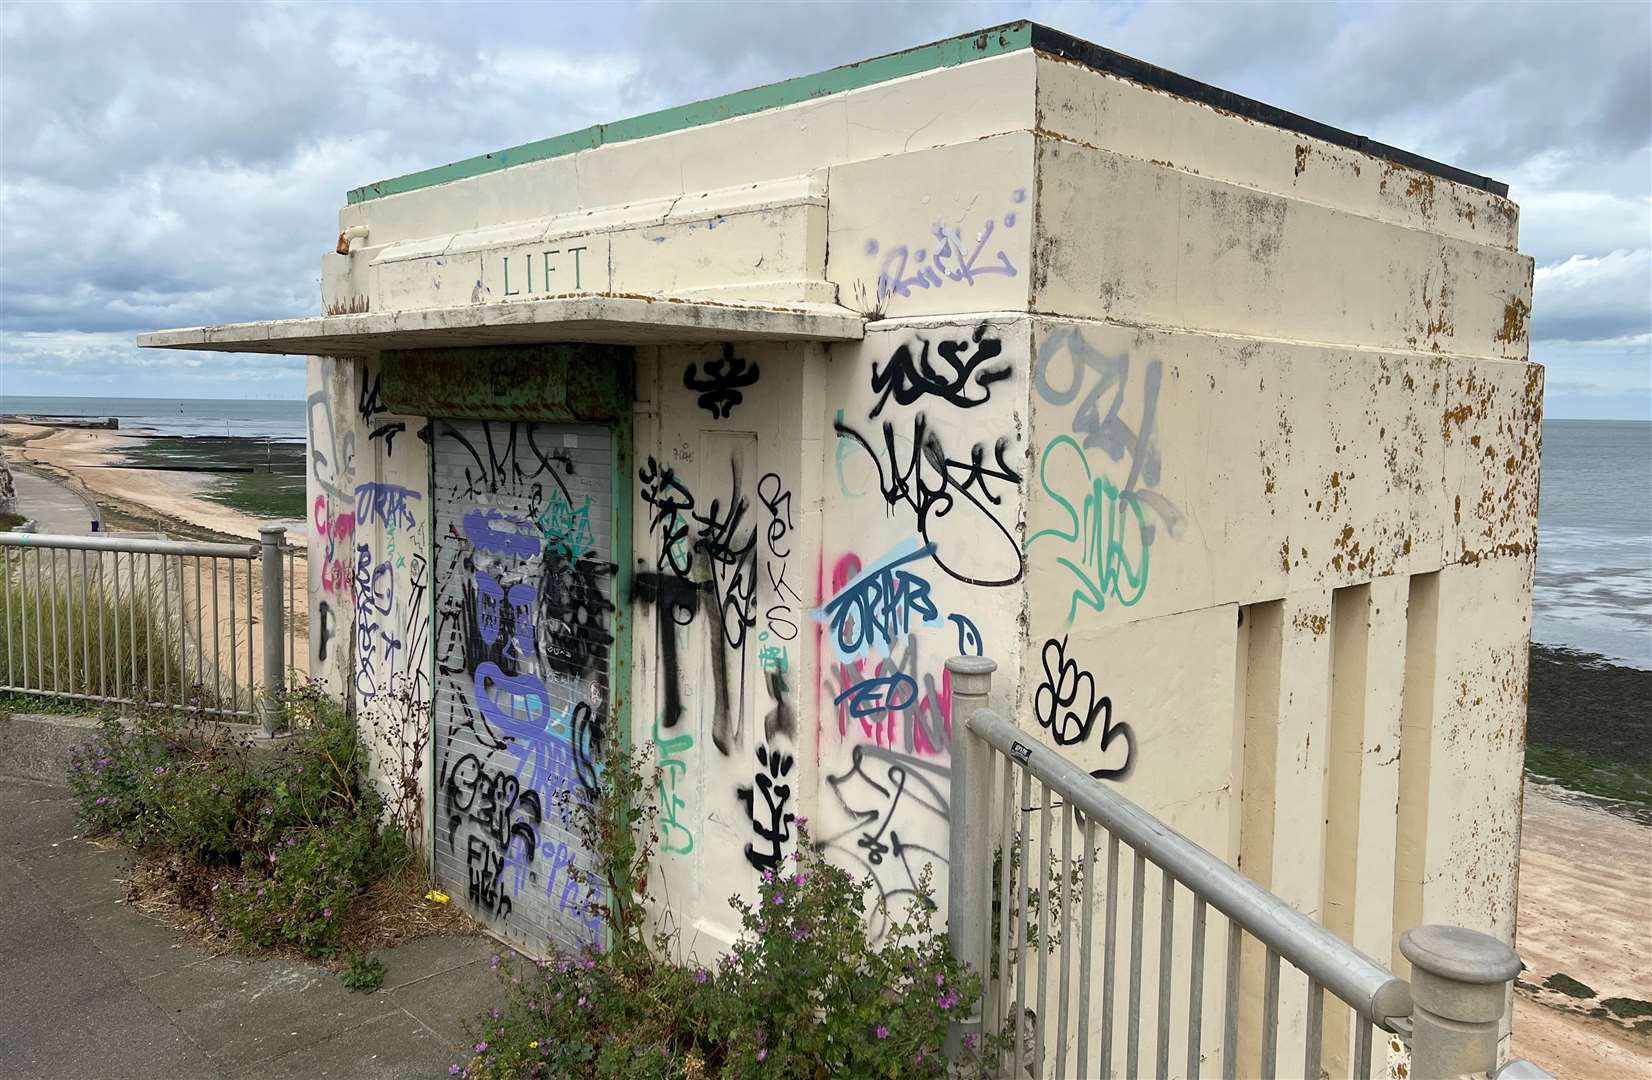 The cliff-top access to the art deco lift at Walpole Bay - long since left for weeds and graffiti